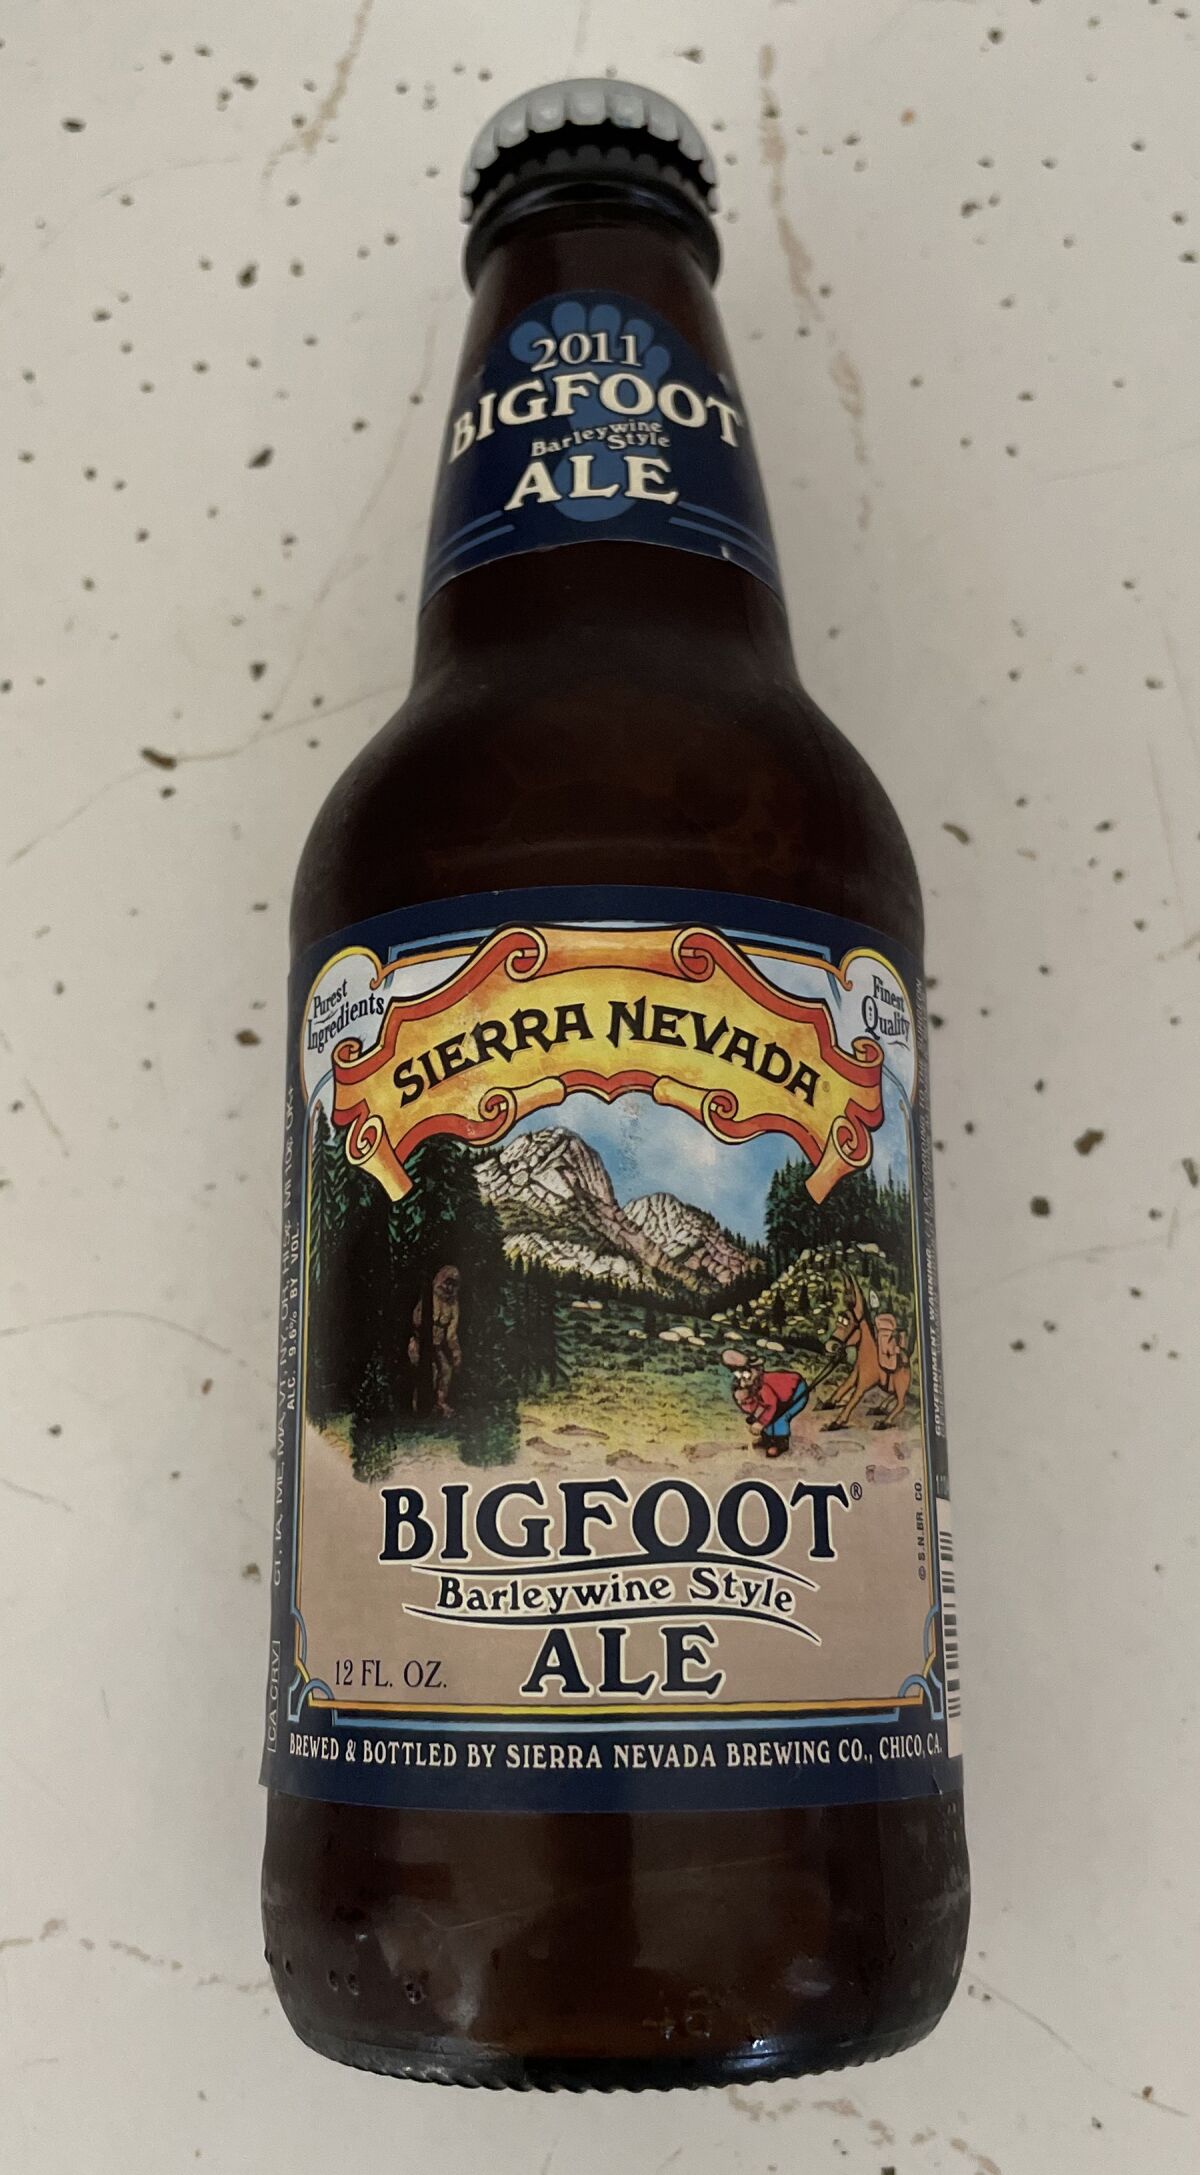 Bigfoot Ale 2011 from Sierra Nevada, Chico